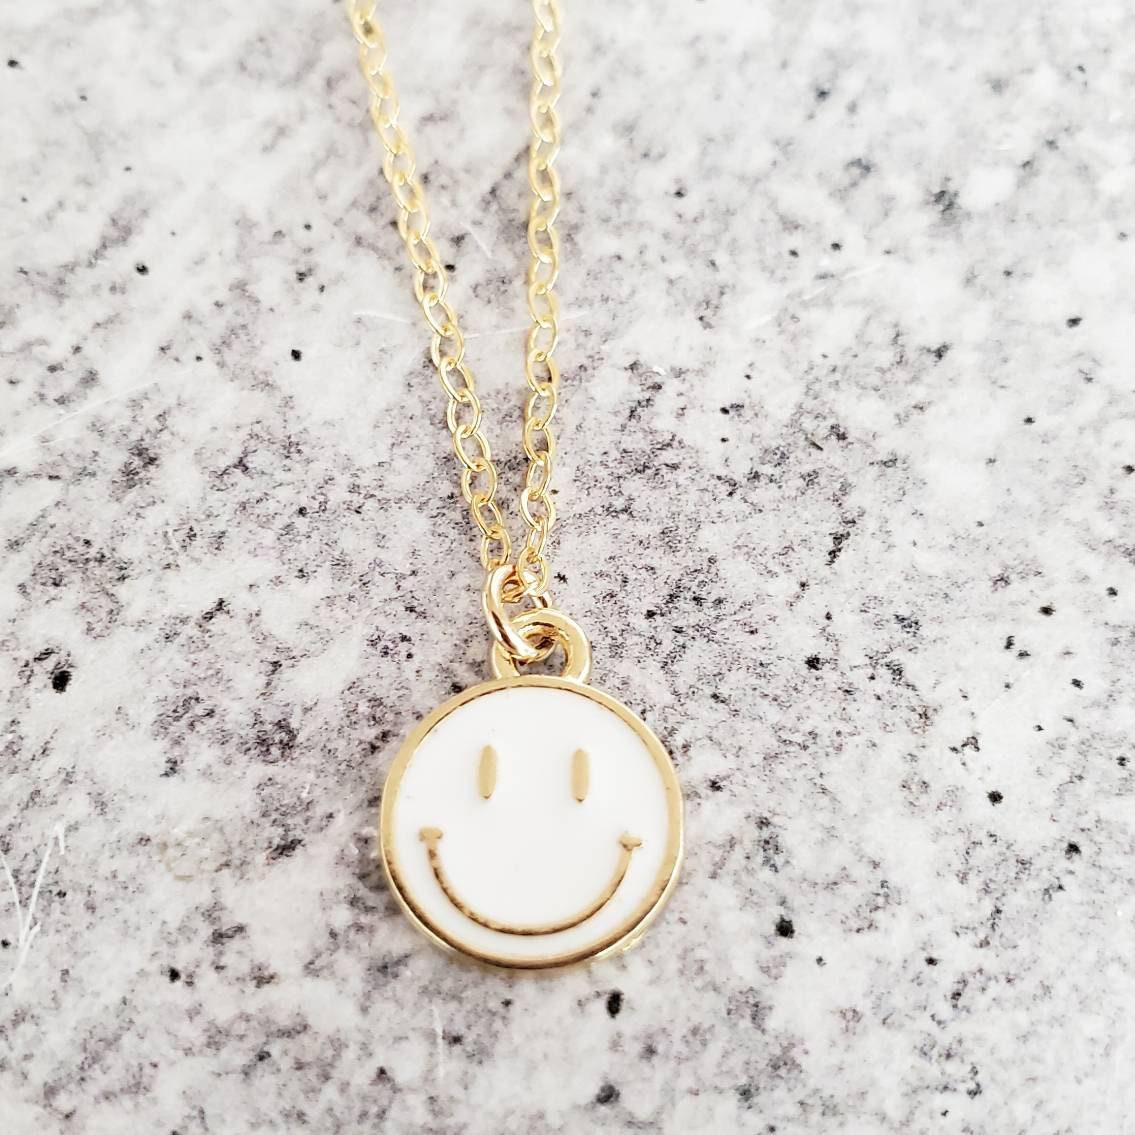 Smiley Face Necklace Salt and Sparkle